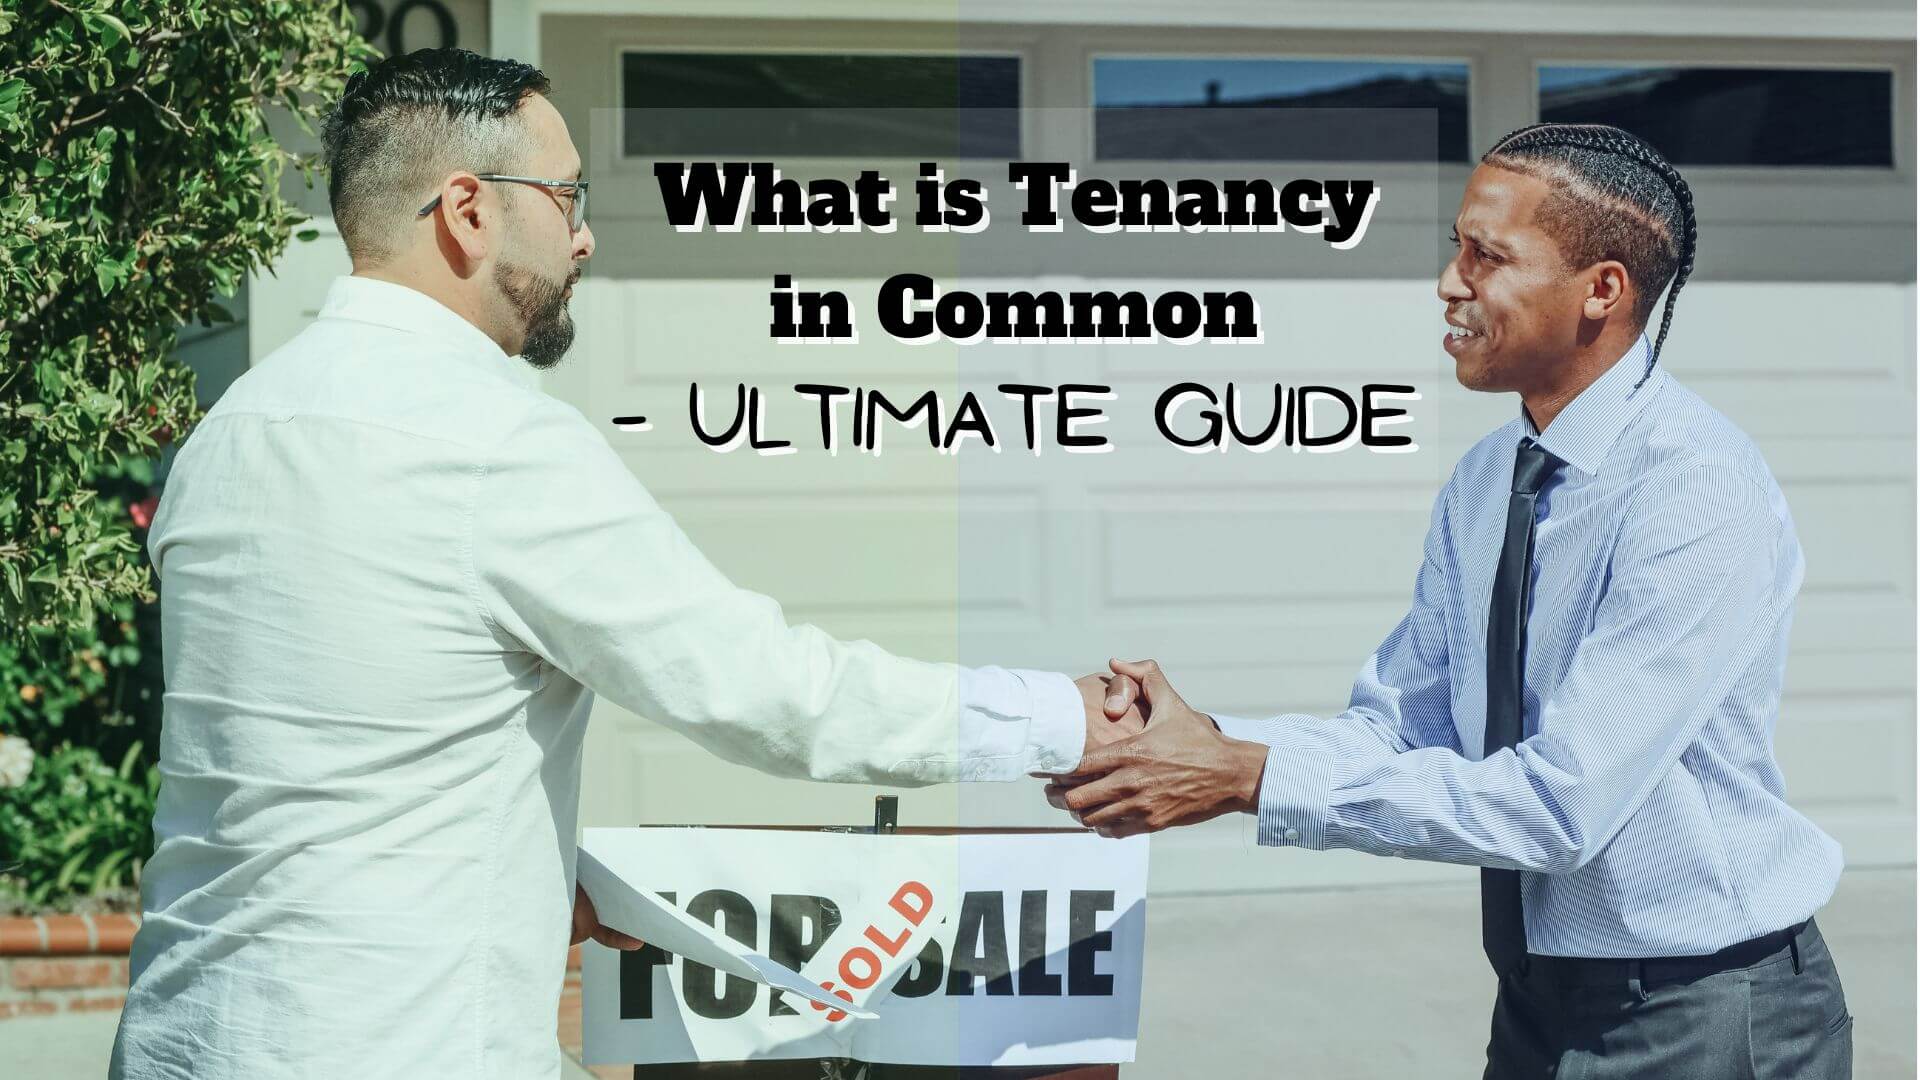 Tenancy in Common is a great option for many different tenant setups and applications. Here's how it works and why it's a popular choice.